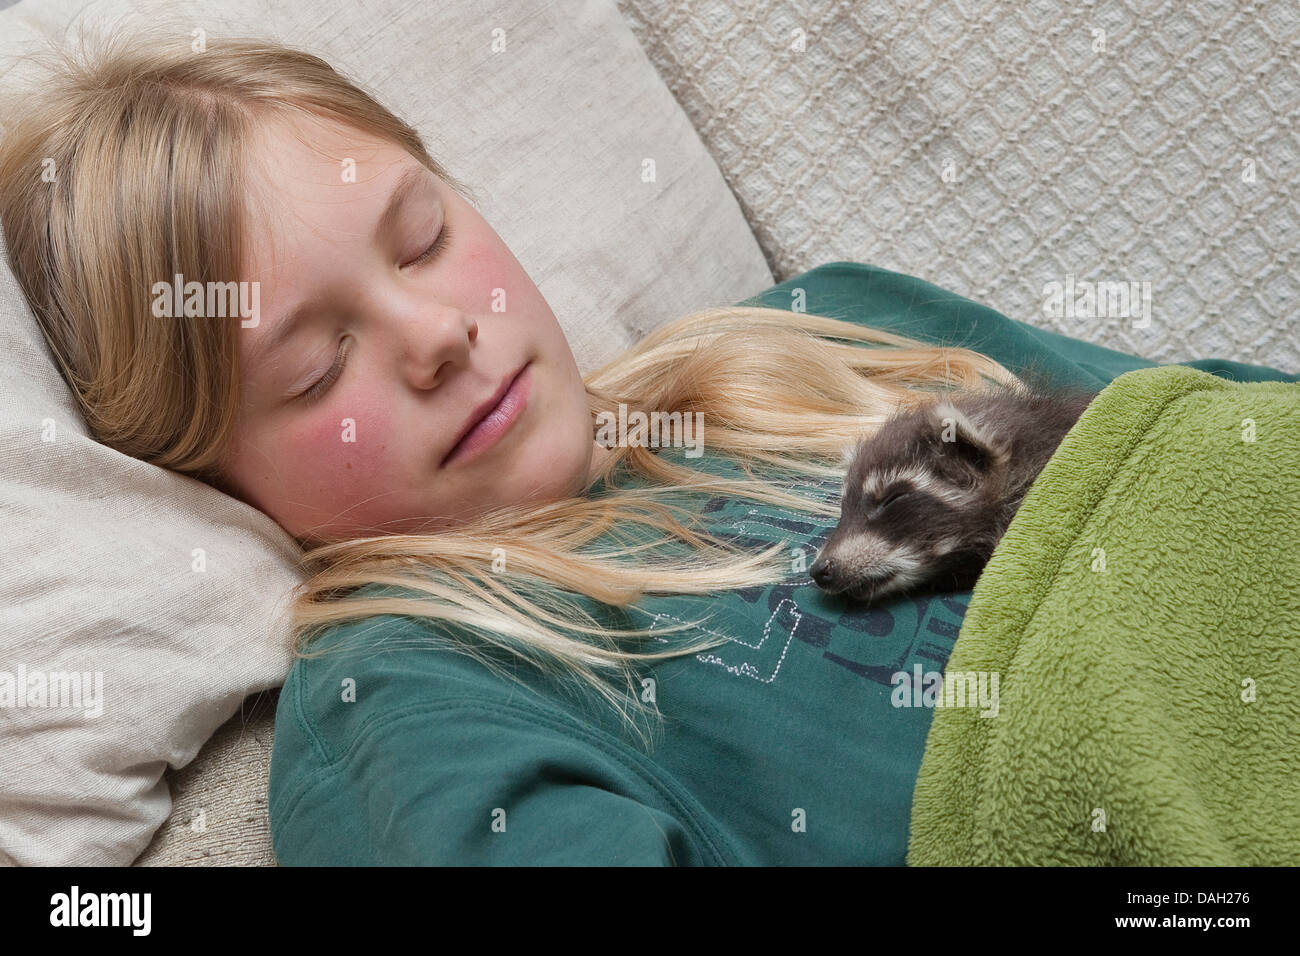 common raccoon (Procyon lotor), animal baby and girl sleeping together under a blanket, Germany Stock Photo